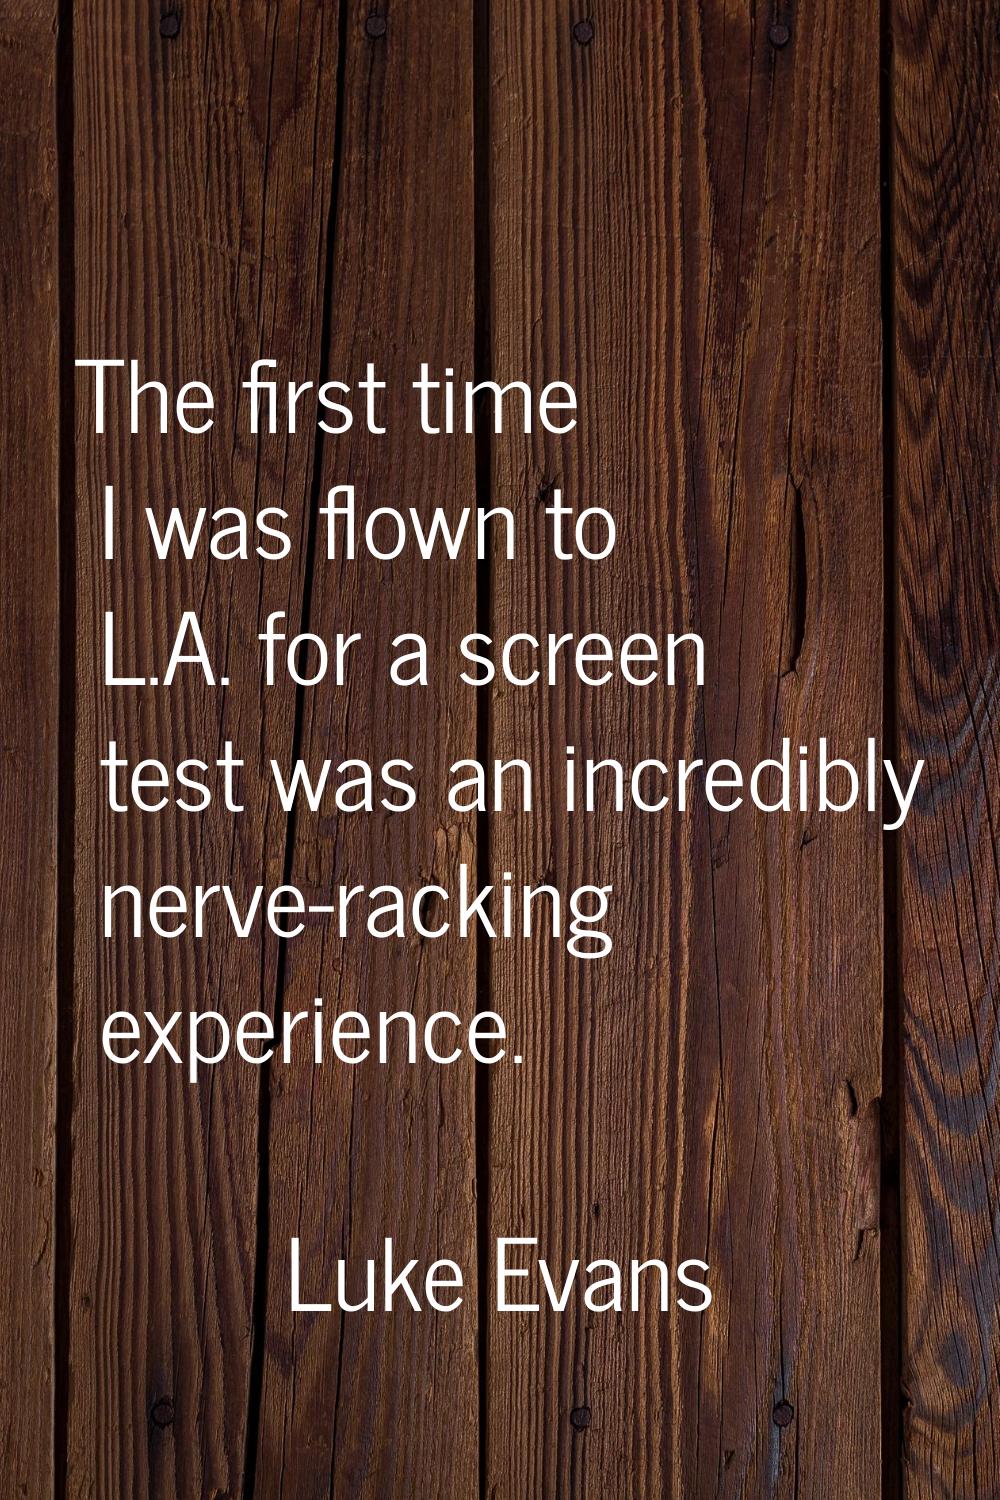 The first time I was flown to L.A. for a screen test was an incredibly nerve-racking experience.